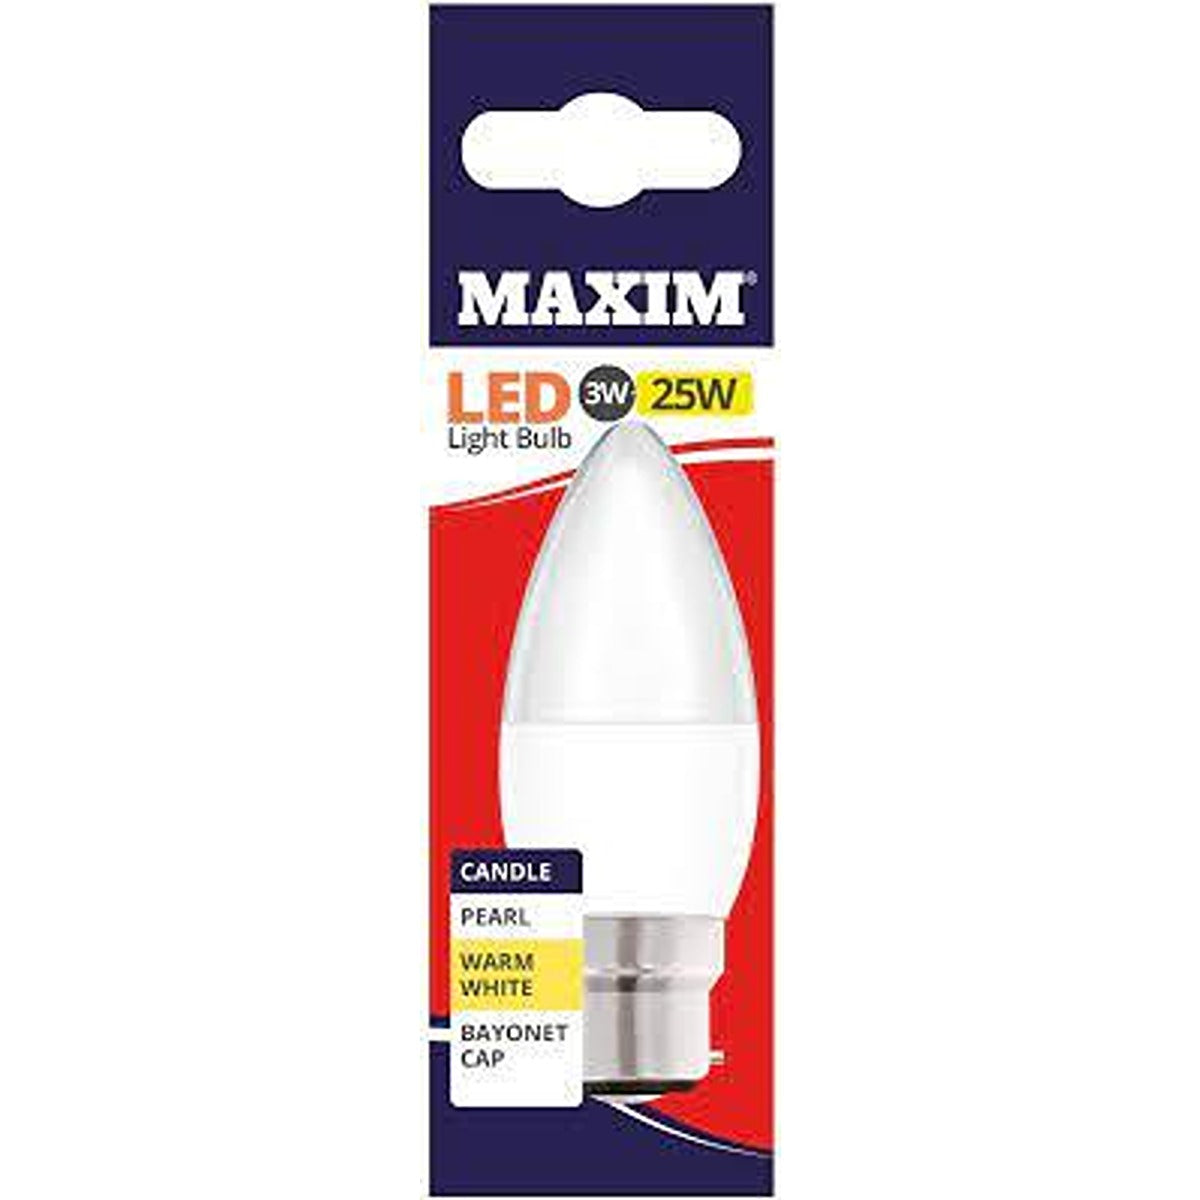 Maxim - LED Bayonet Low Energy Candle Light Bulb 3W - Daylight - Continental Food Store